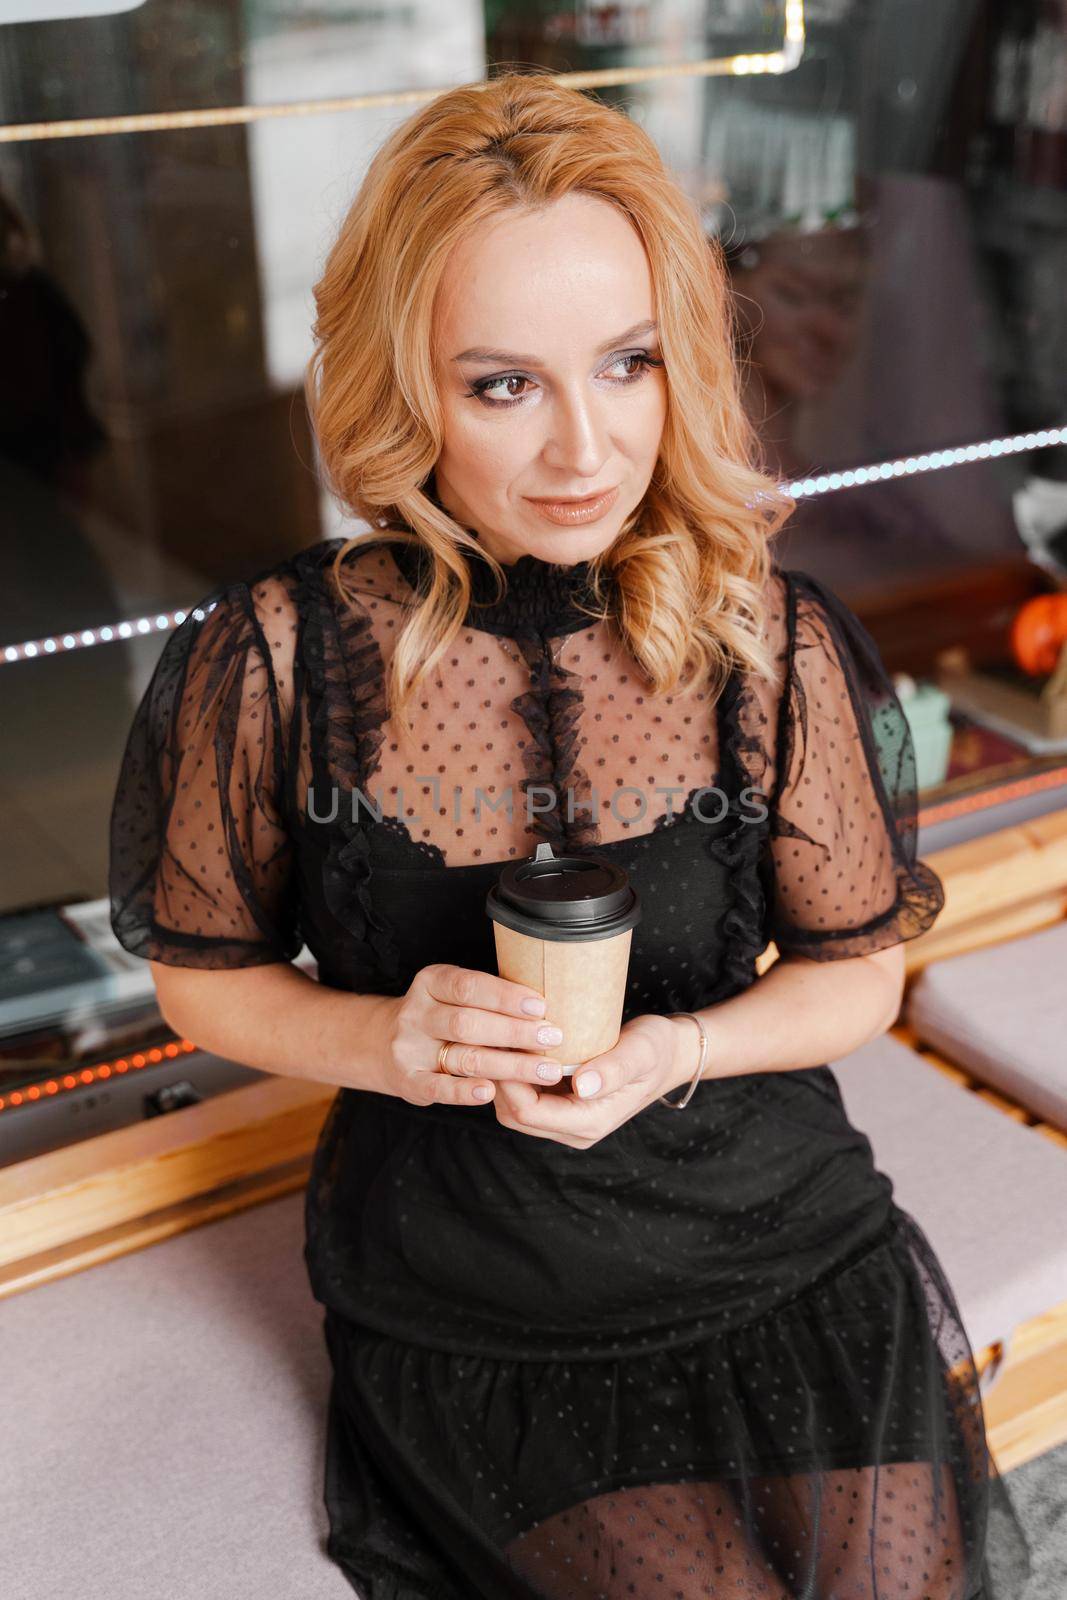 Young charming blonde with a cute smile and makeup while relaxing in a cafe. She is holding a cup of coffee in her hands. She is dressed in a black dress with transparent sleeves